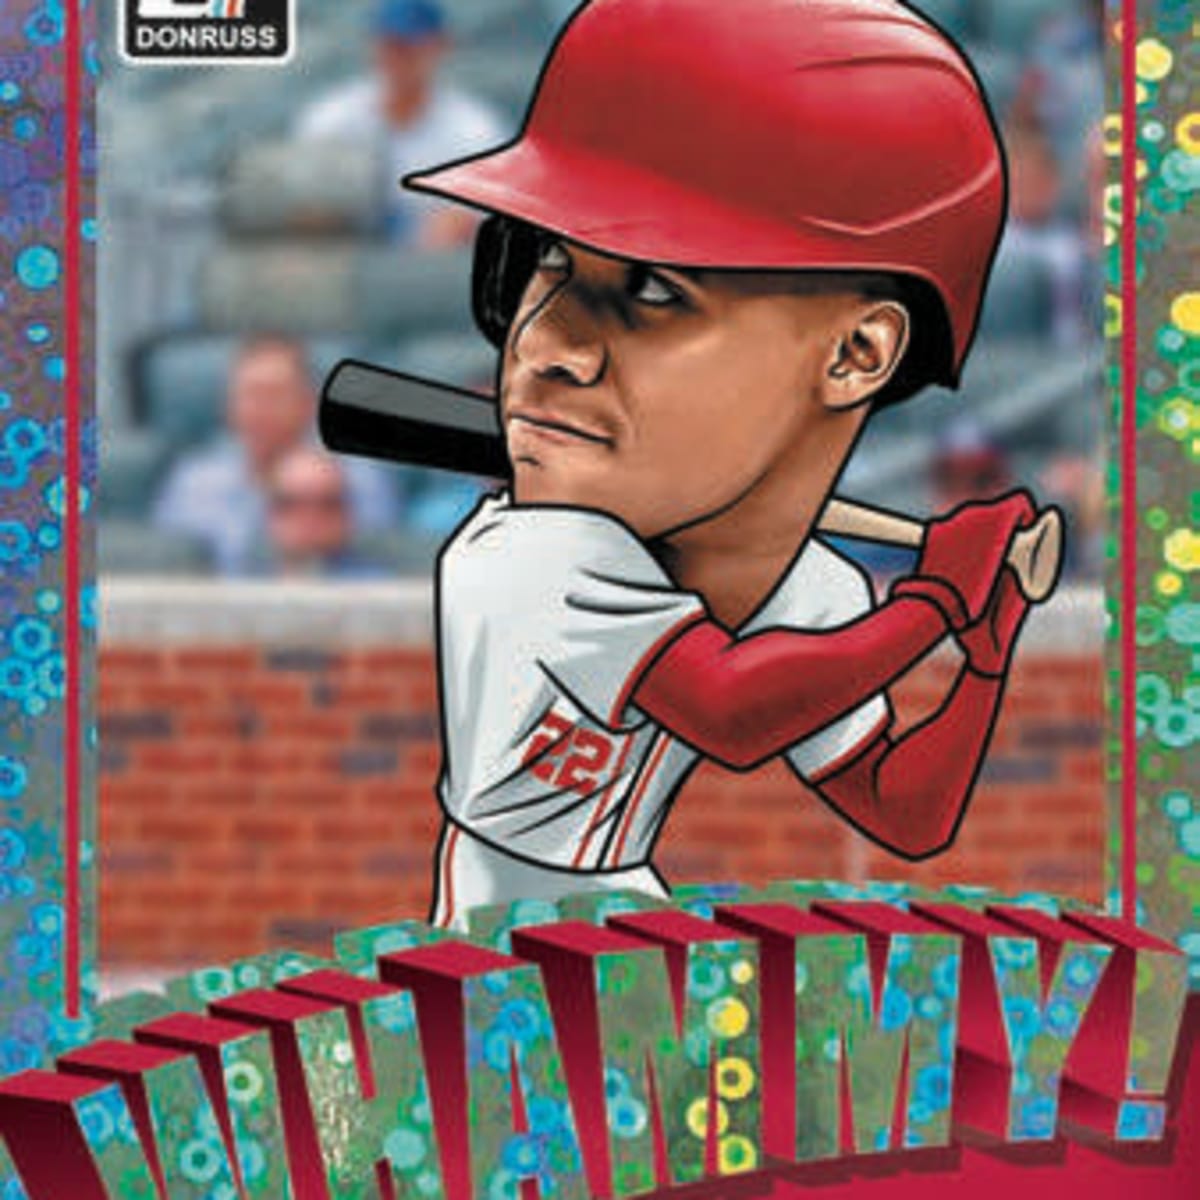 The 2022 Topps Series 1 Baseball Card Short Print and Variations Guide